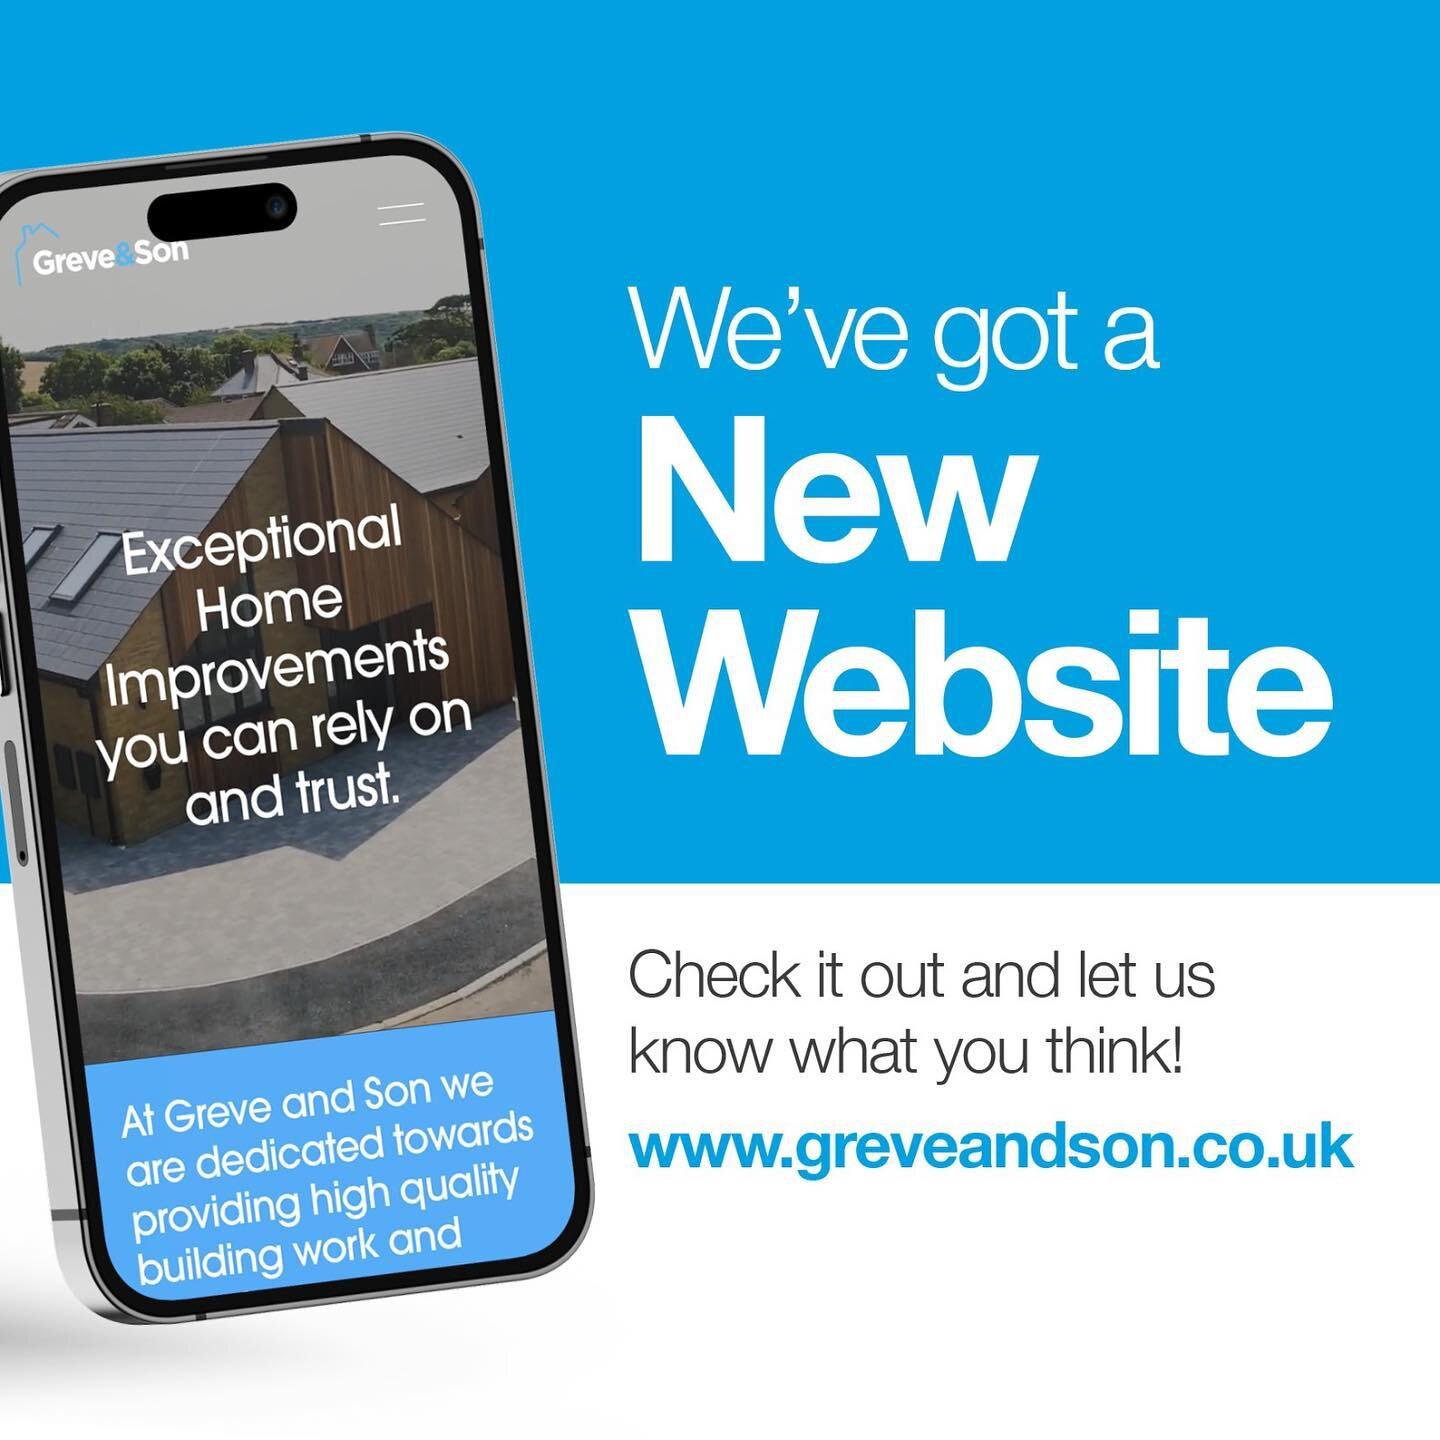 Check out our new updated website www.greveandson.co.uk 🤩